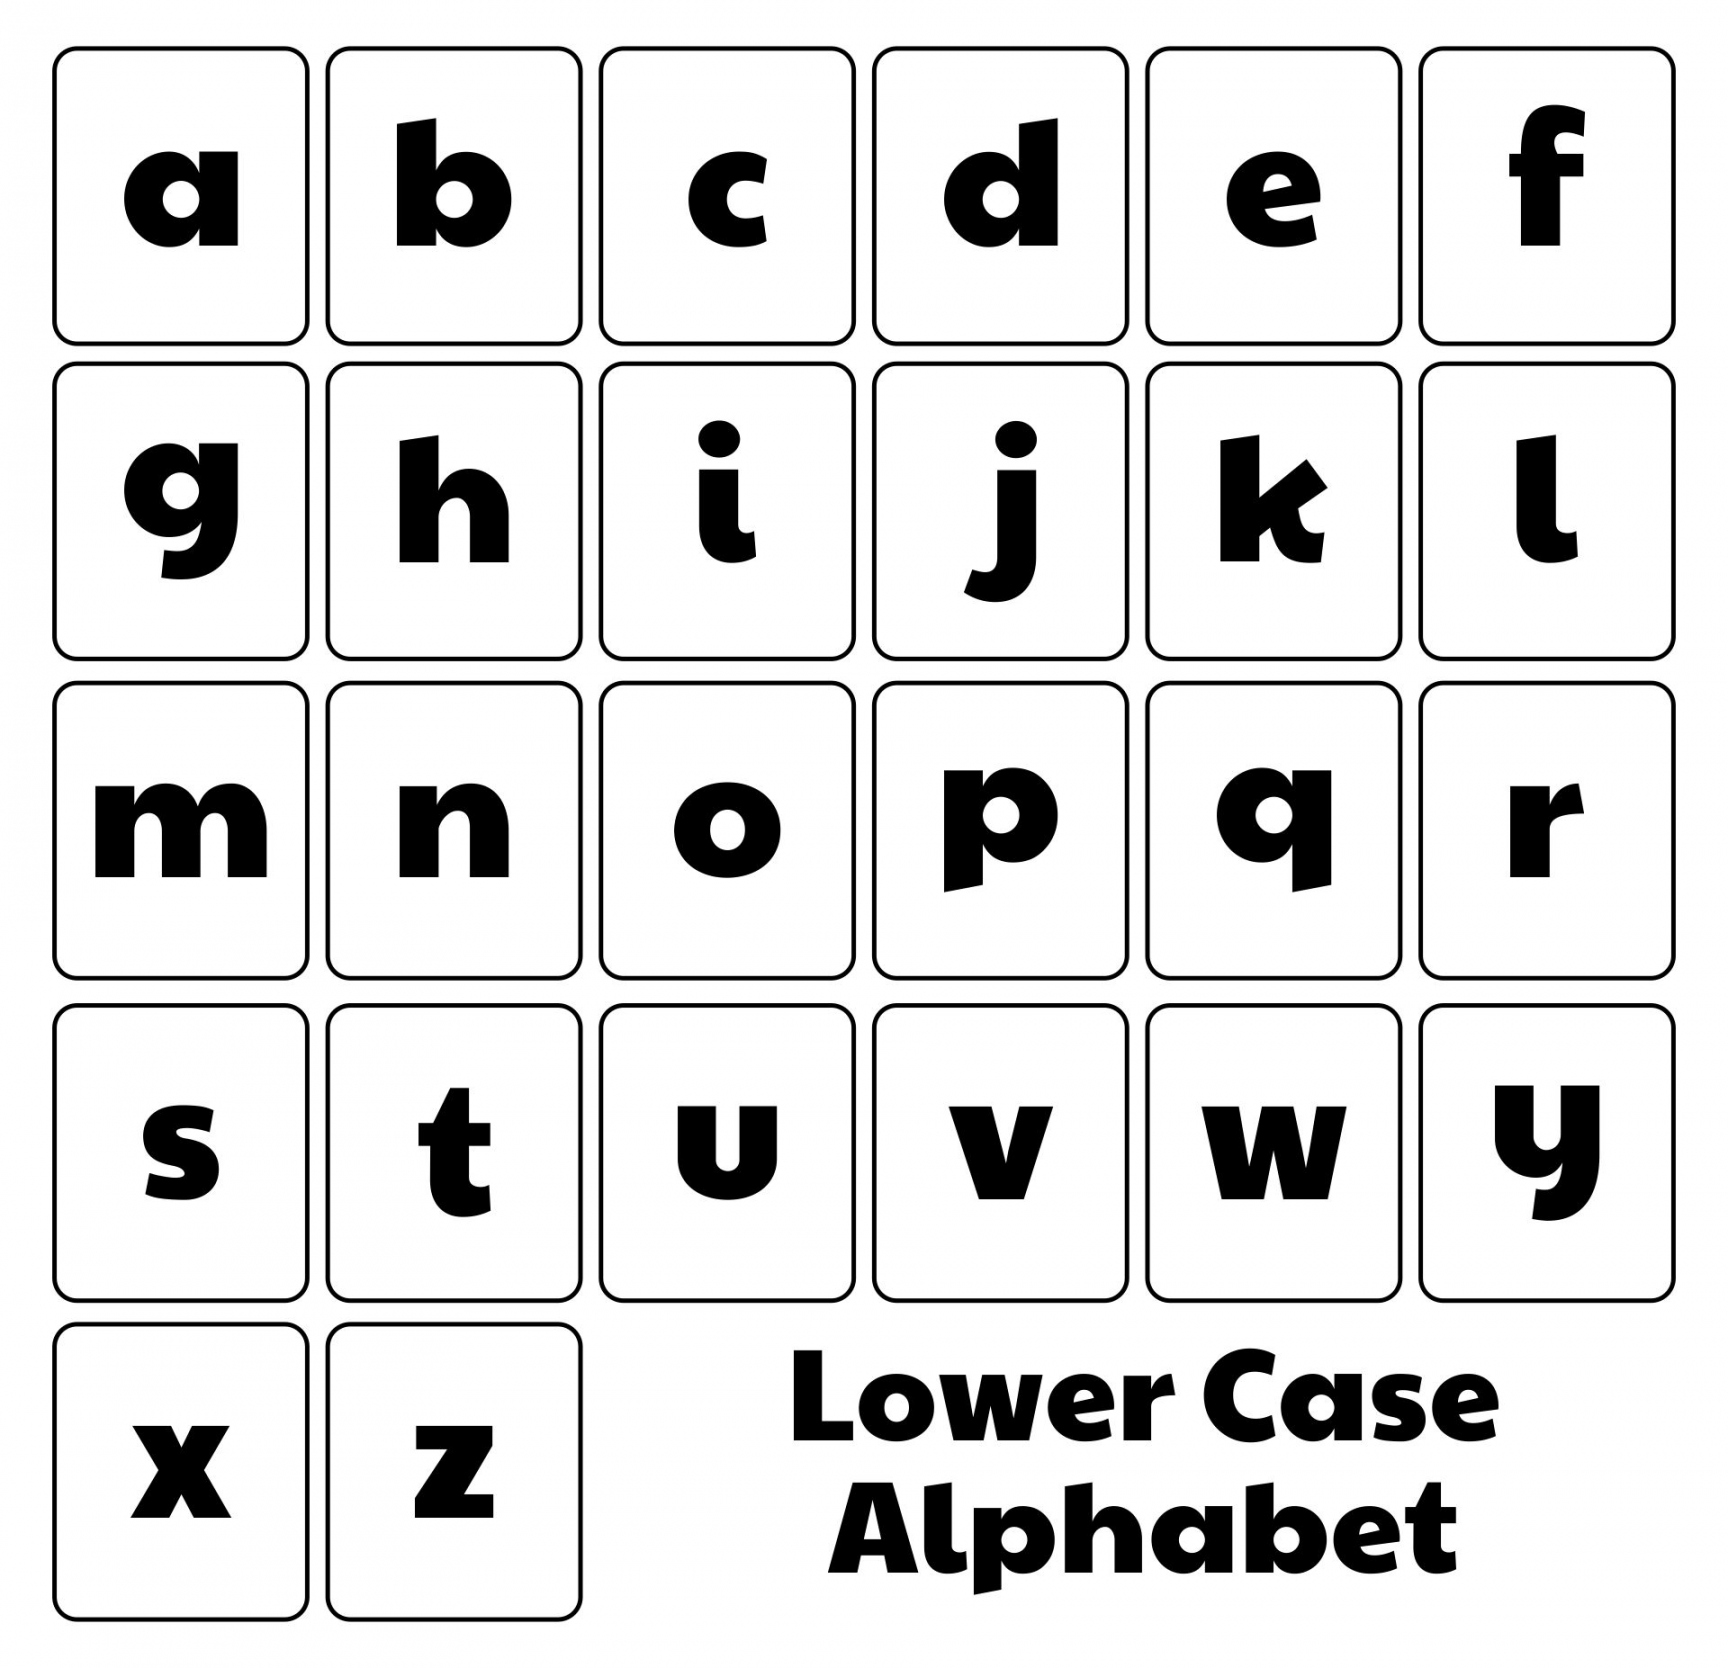 Best Printable Lower Case Alphabet Flash Cards - printablee - Free Printable Alphabet Flash Cards Upper And Lower Case